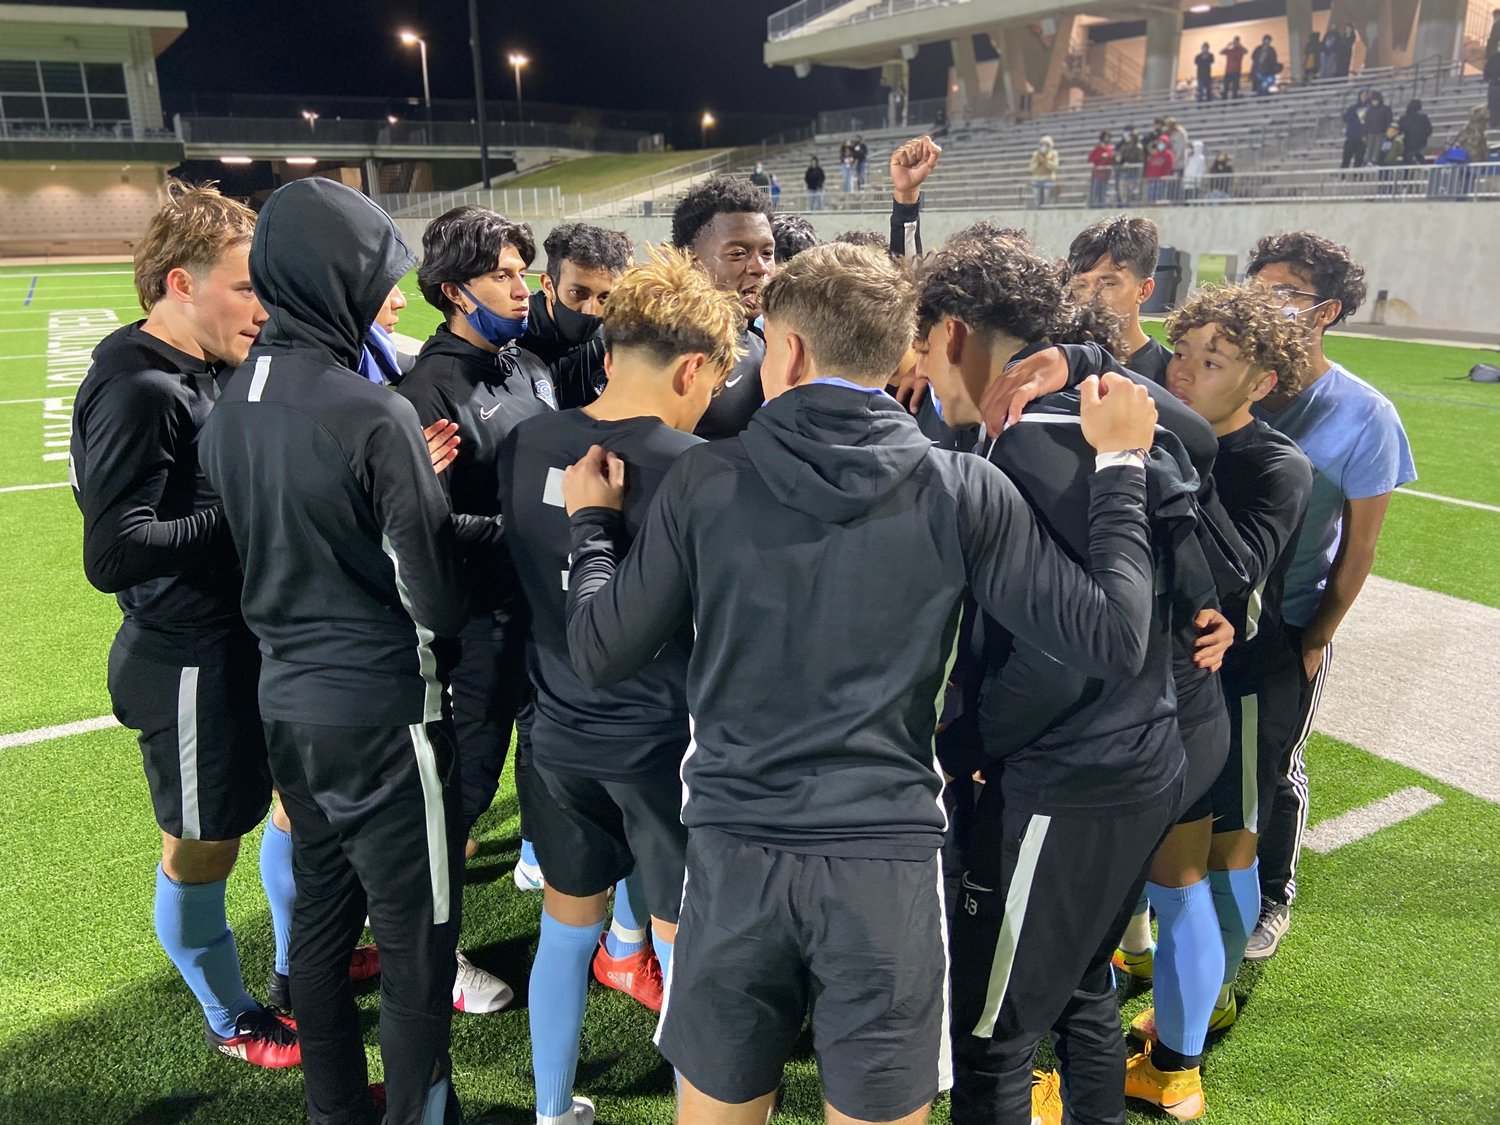 Paetow players gather to pray after their 2-1 win over A&M Consolidated on Friday, March 18, at Legacy Stadium. The win secured the District 19-5A boys soccer title for the second straight season.